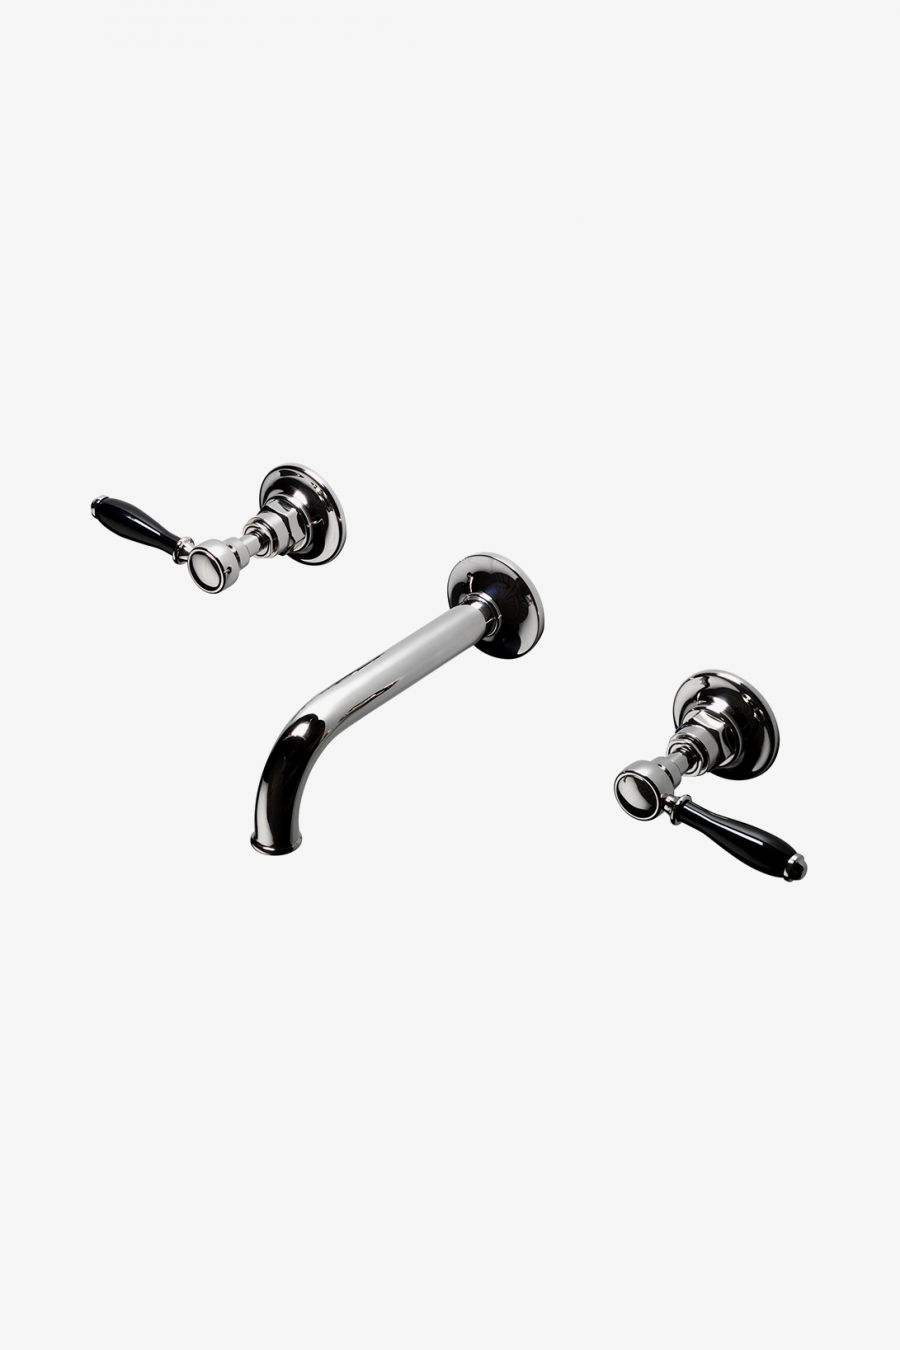 75% Off Retail Waterworks Easton Double Robe Hook Chrome NEW IN BOX SEALED 